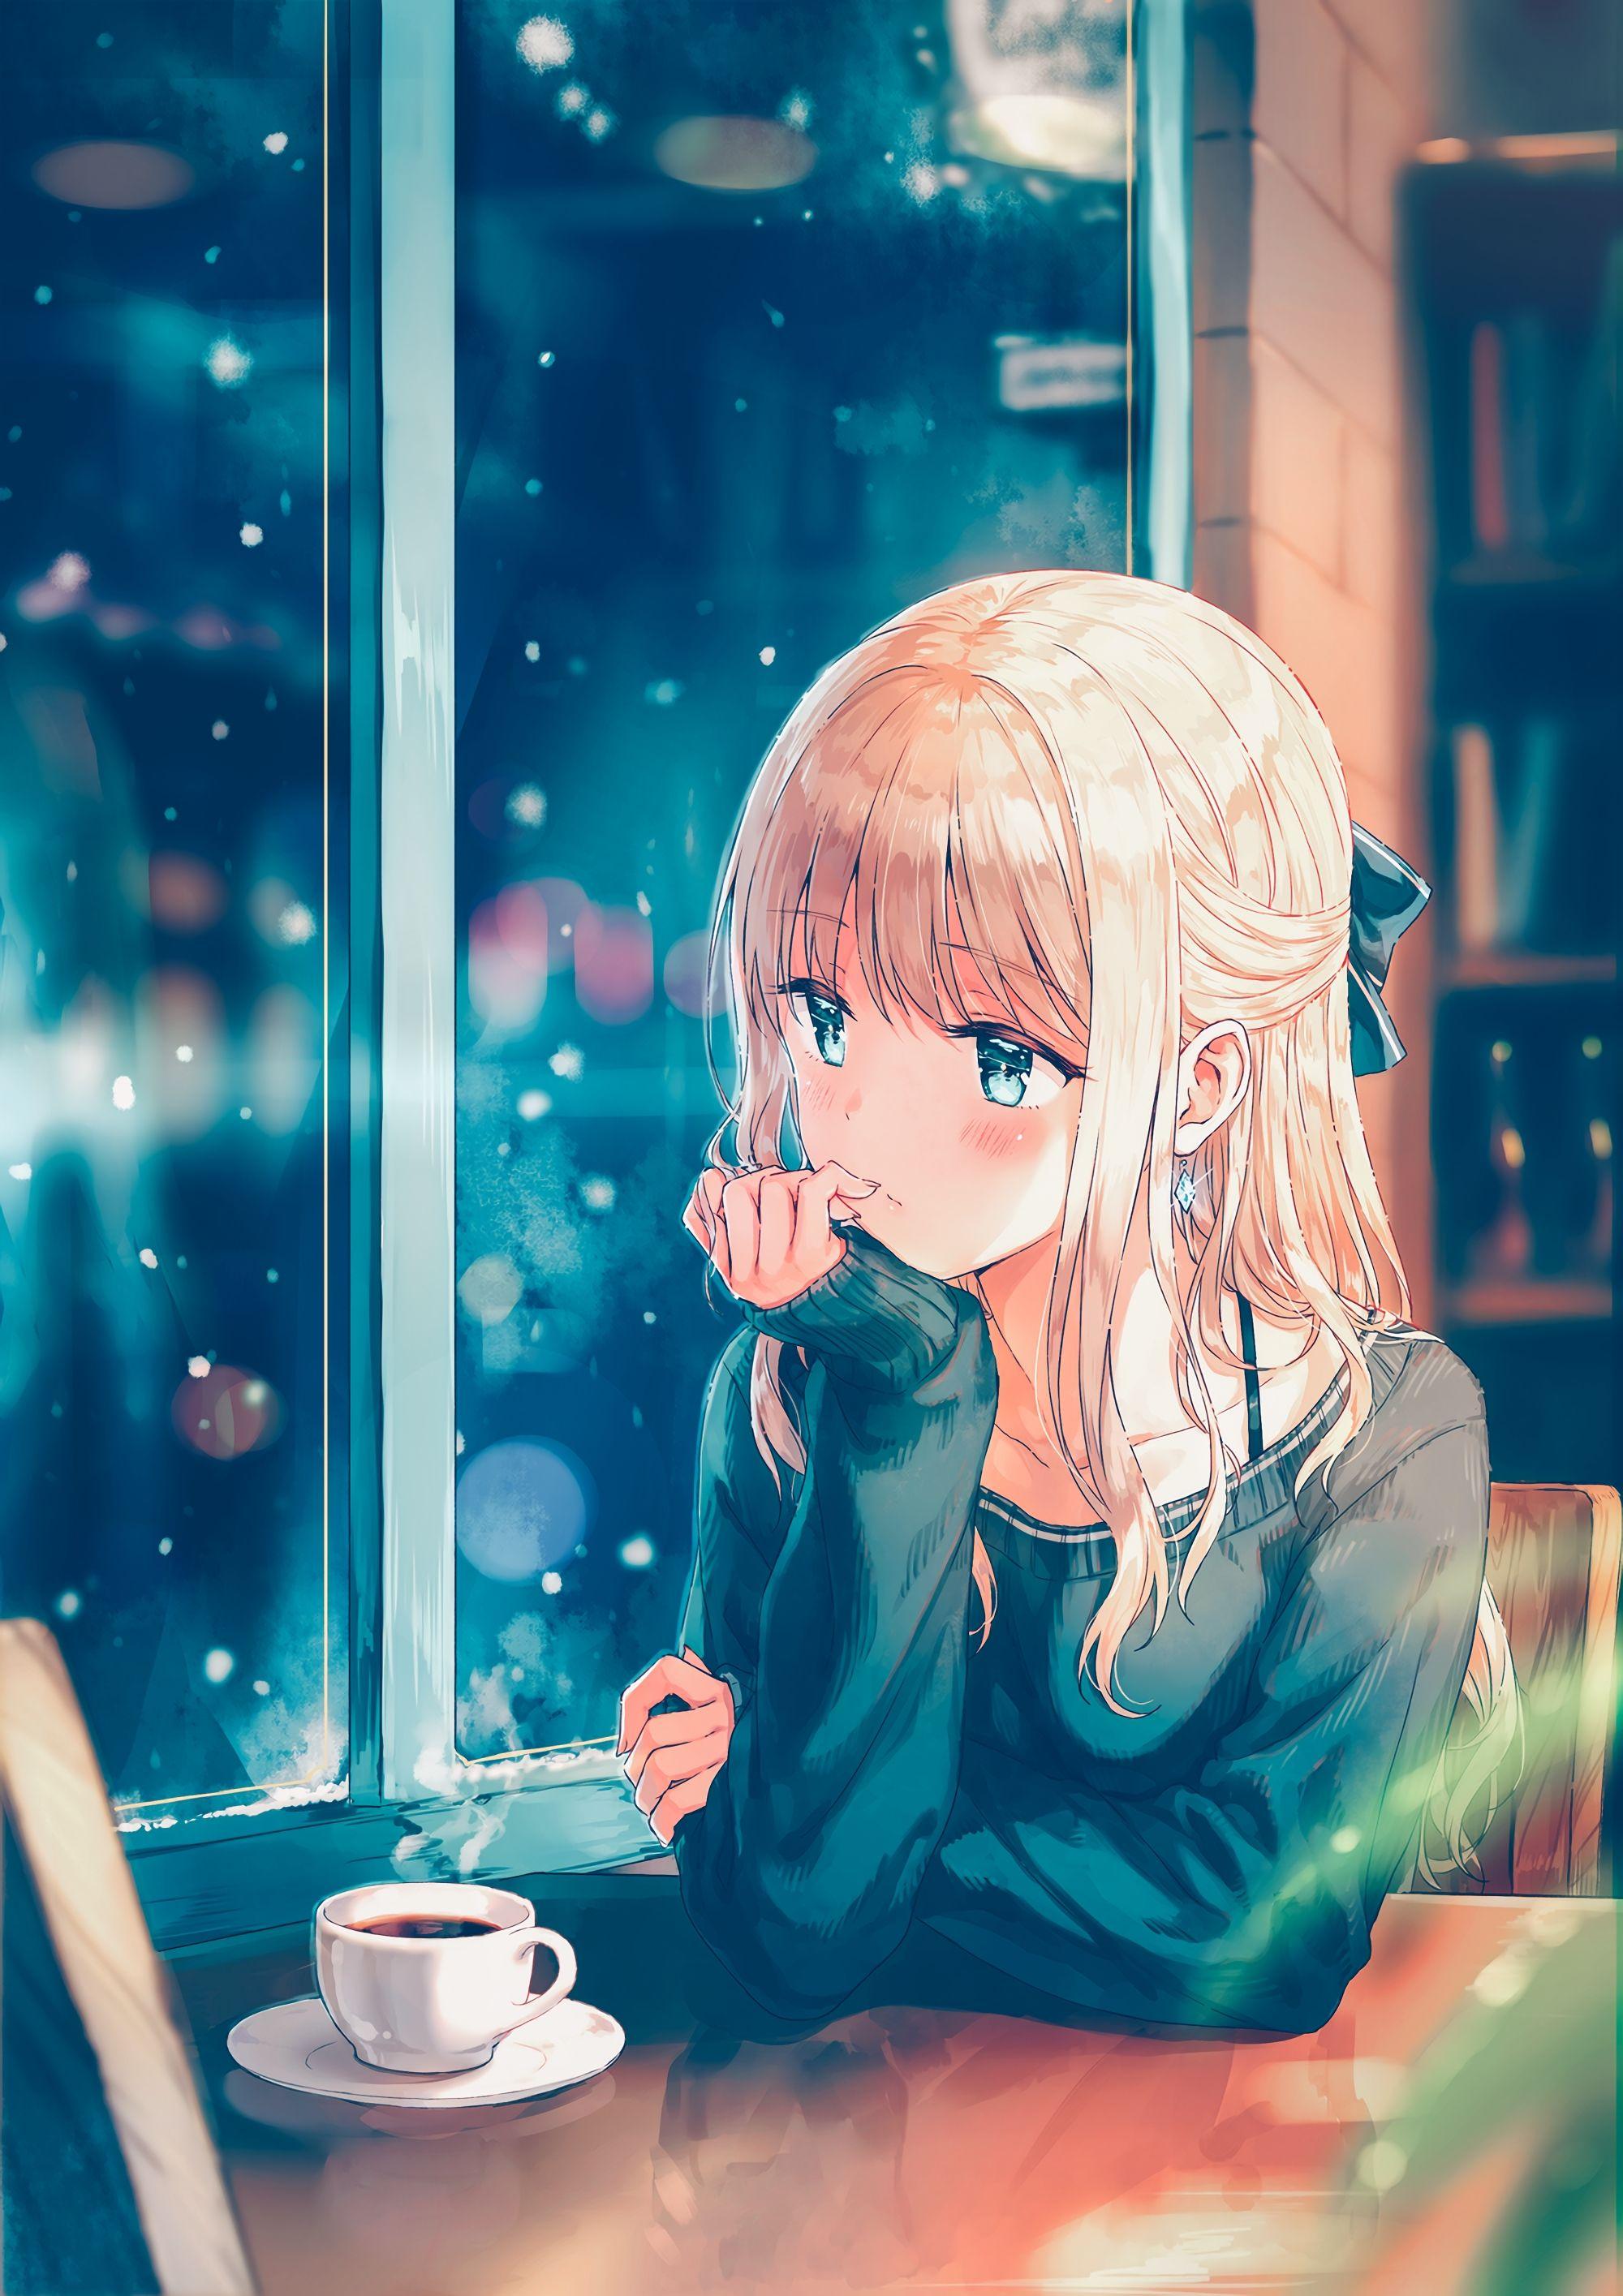 Cute Girl Anime Wallpapers - Wallpaper Cave